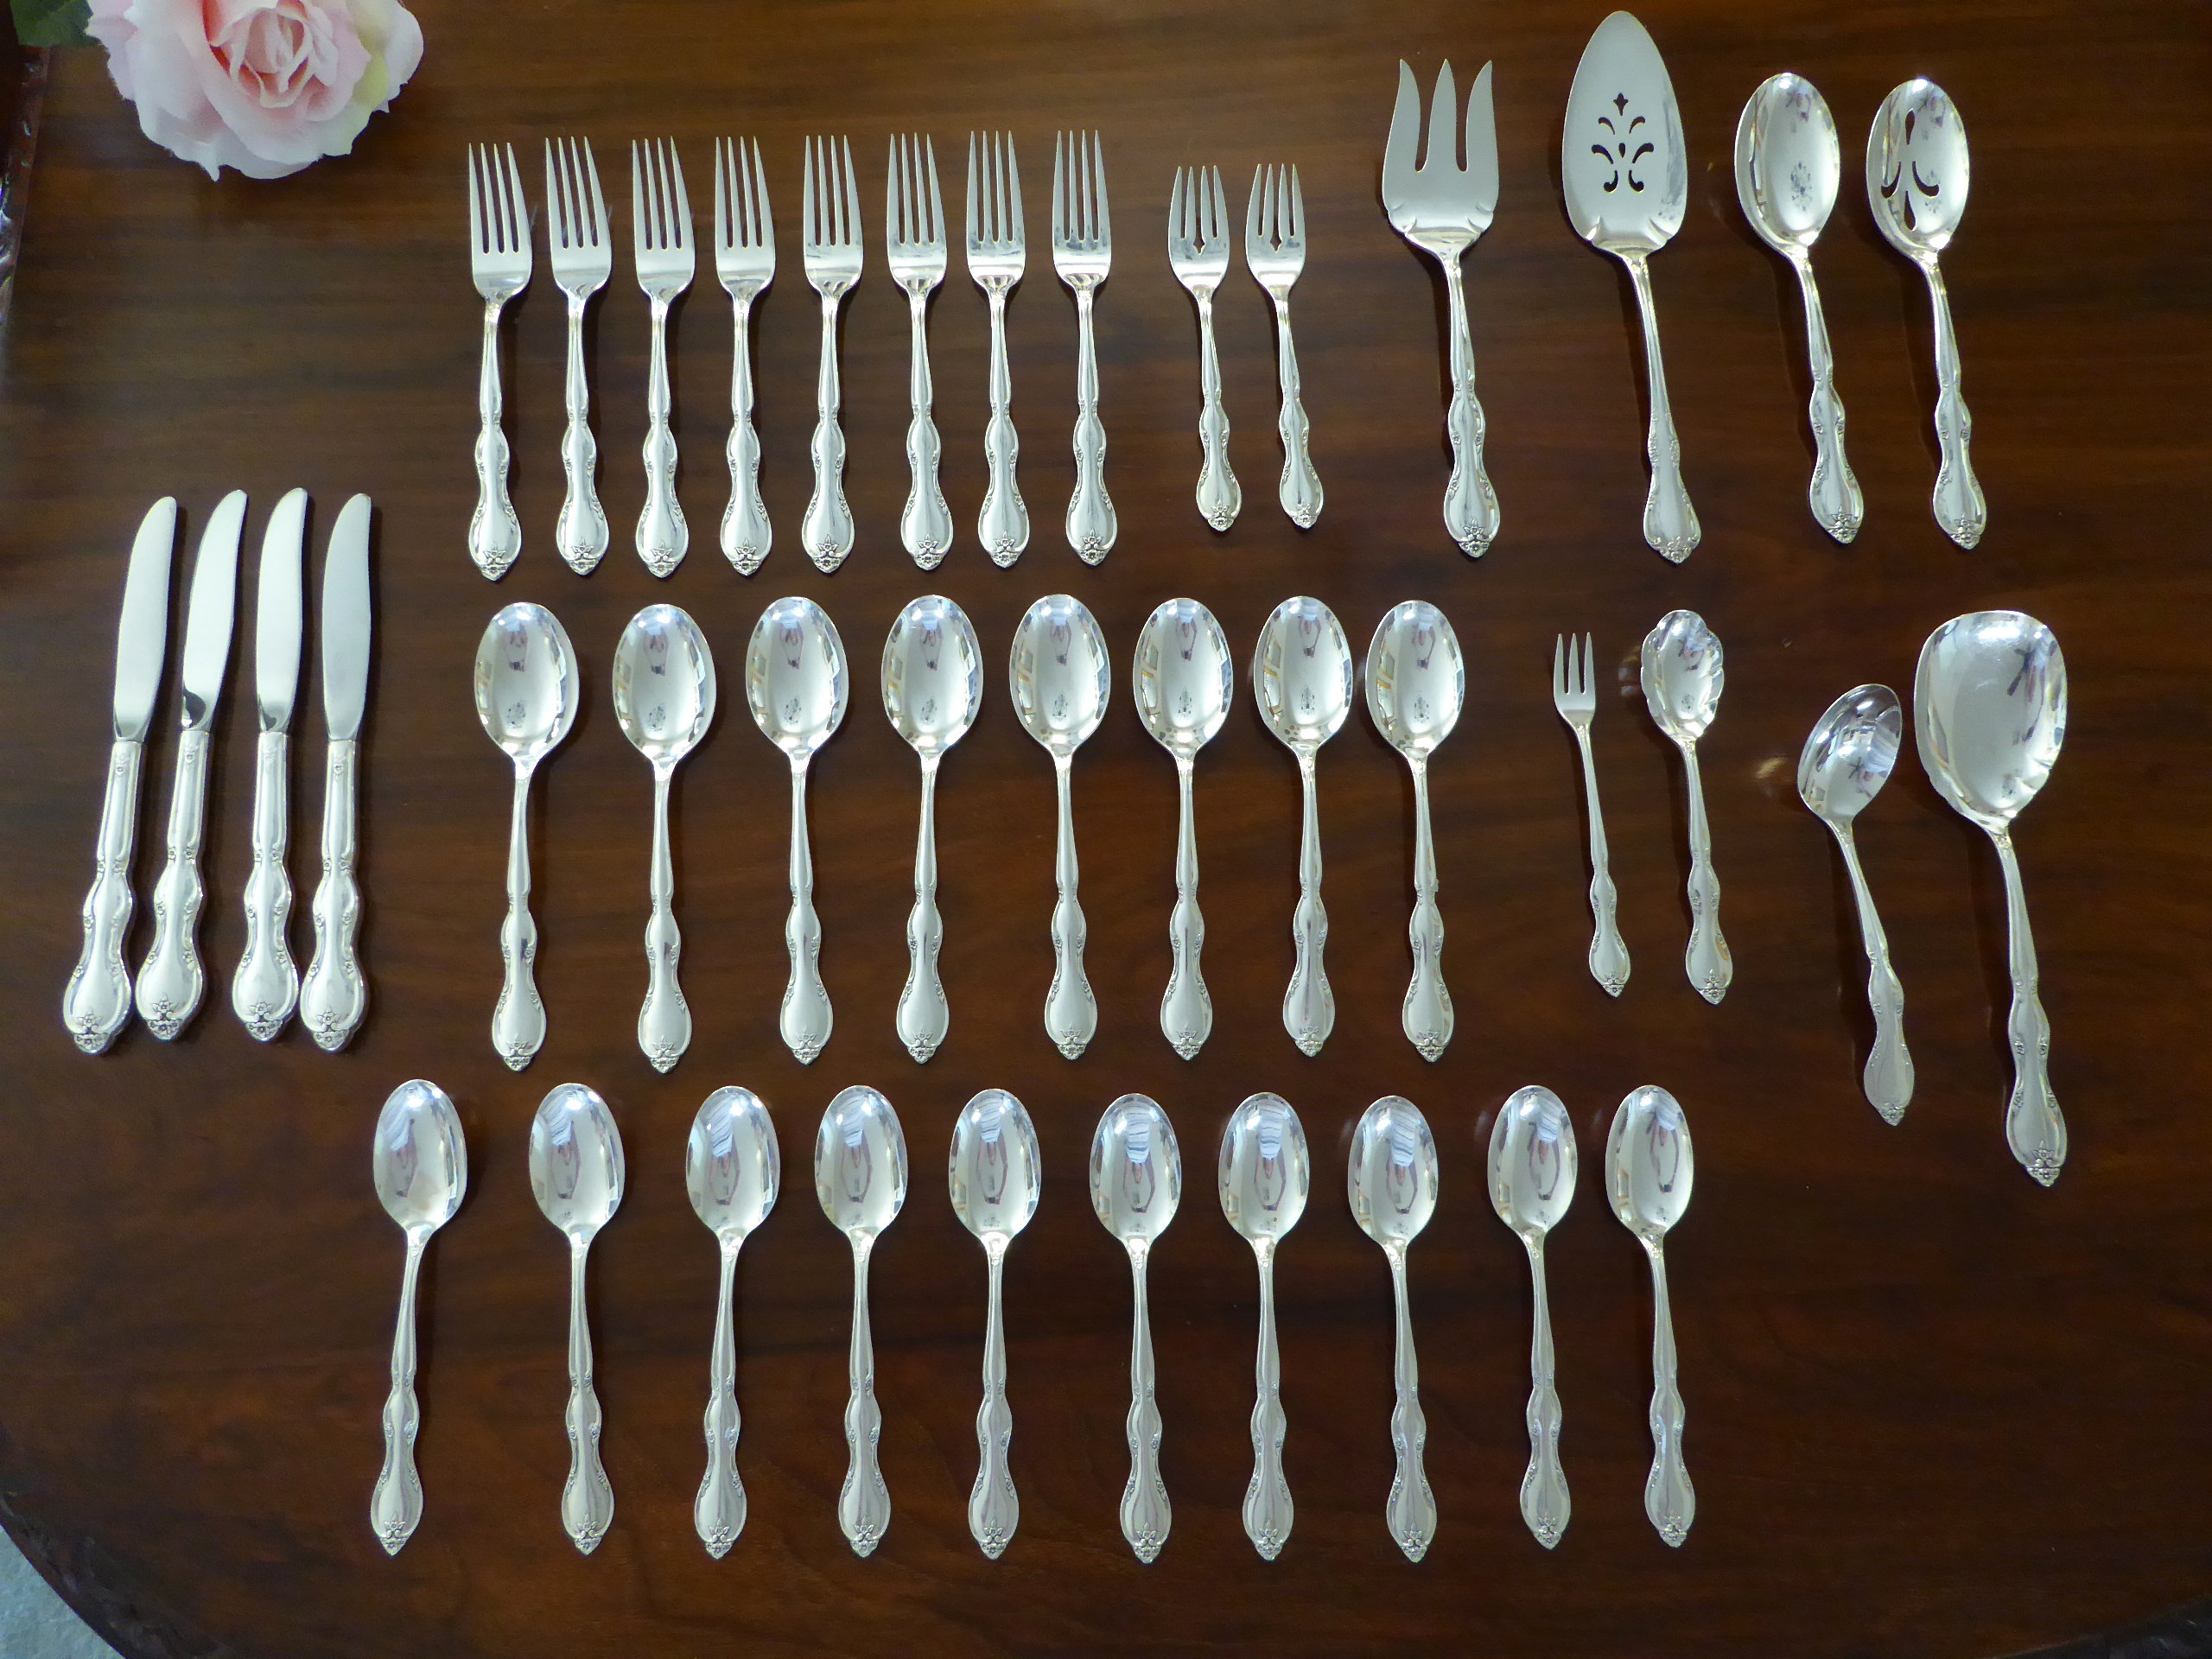 40Pcs Juliette Wm Rogers & Sons Mfg Co Silver Plate Replacement Pieces, Silverplate Spoons Serving Pieces"